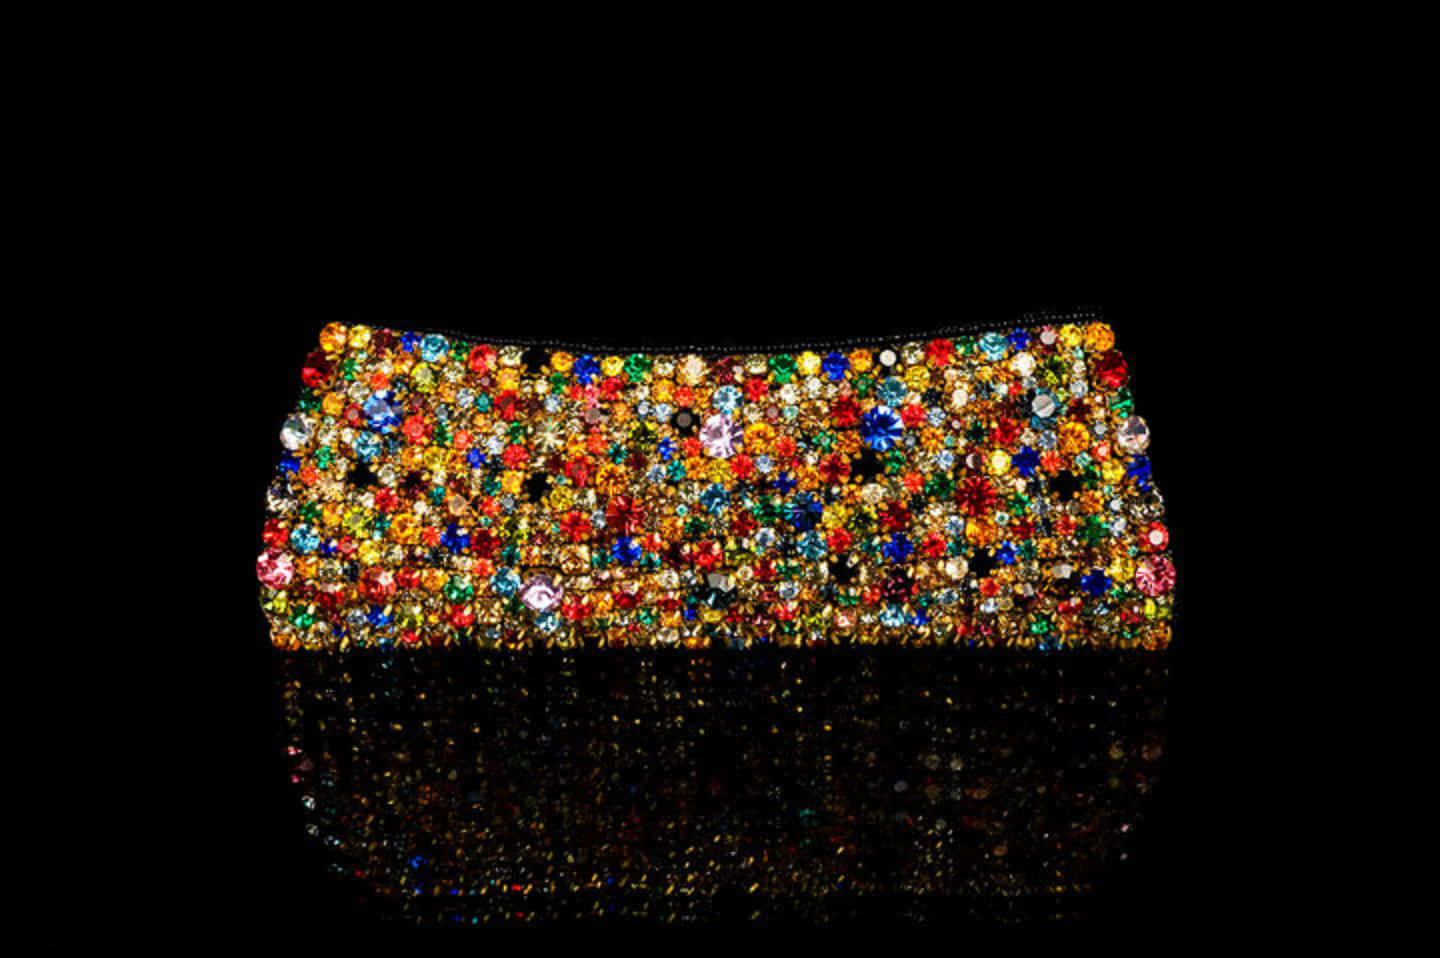 A Colorful Clutch Bag With Multi Colored Beads